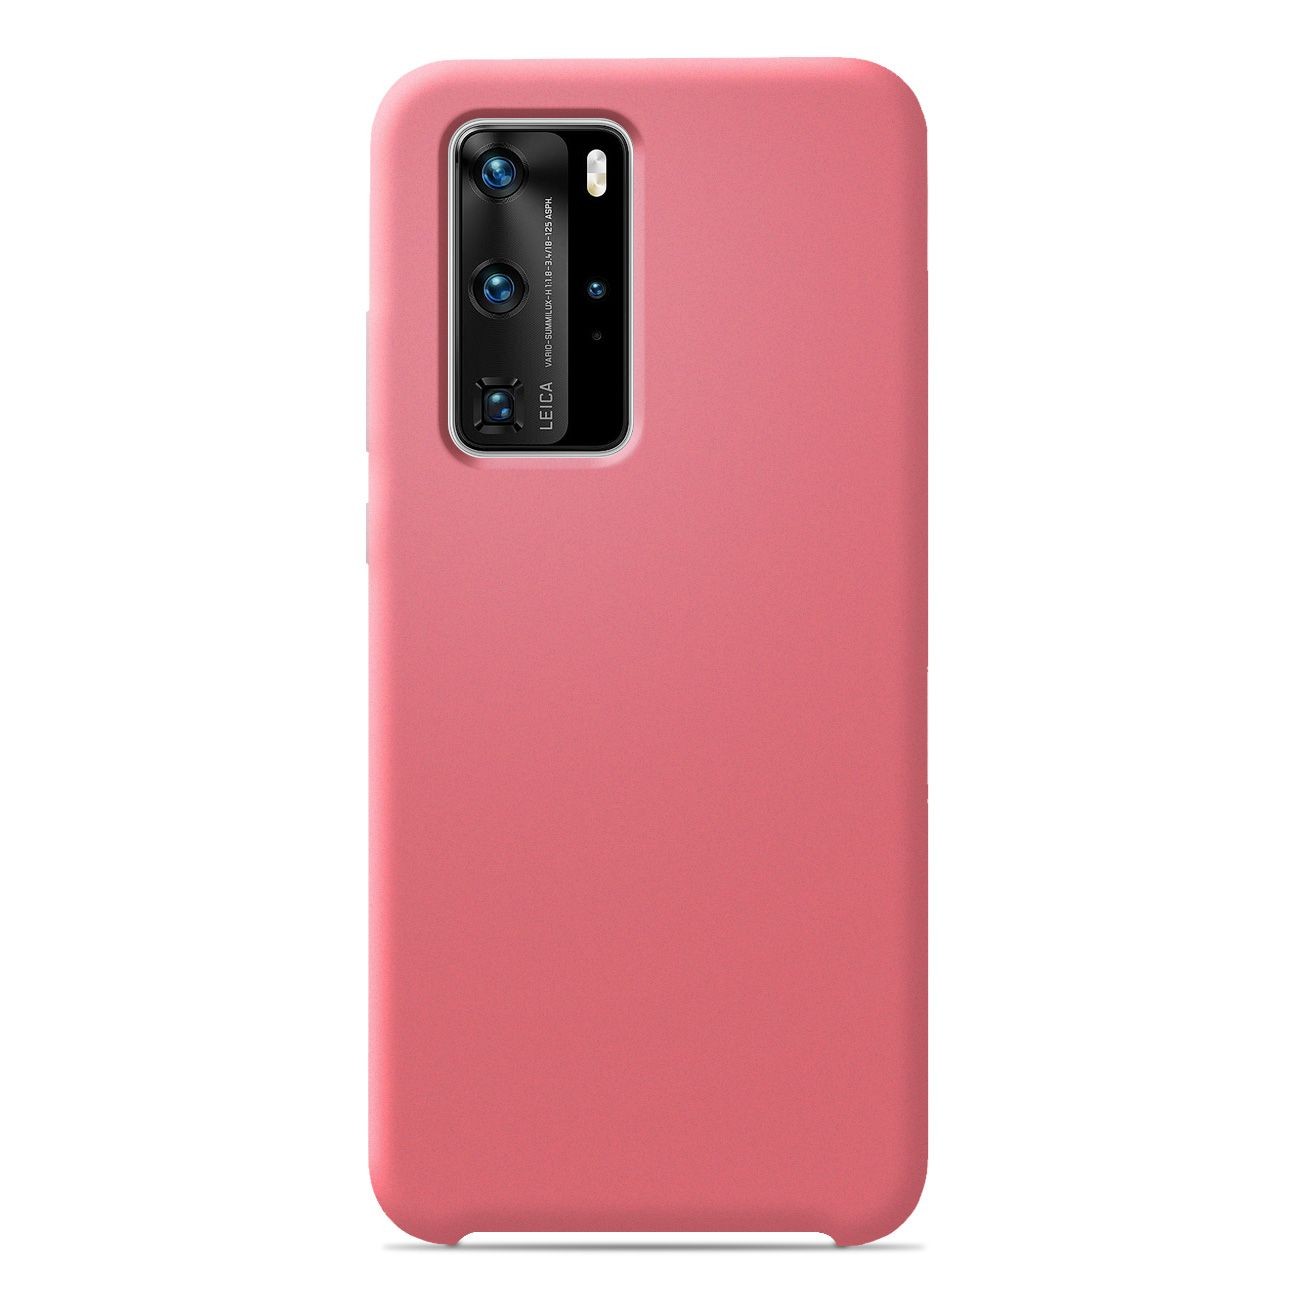 Coque silicone unie Soft Touch Rose compatible Huawei P40 Pro